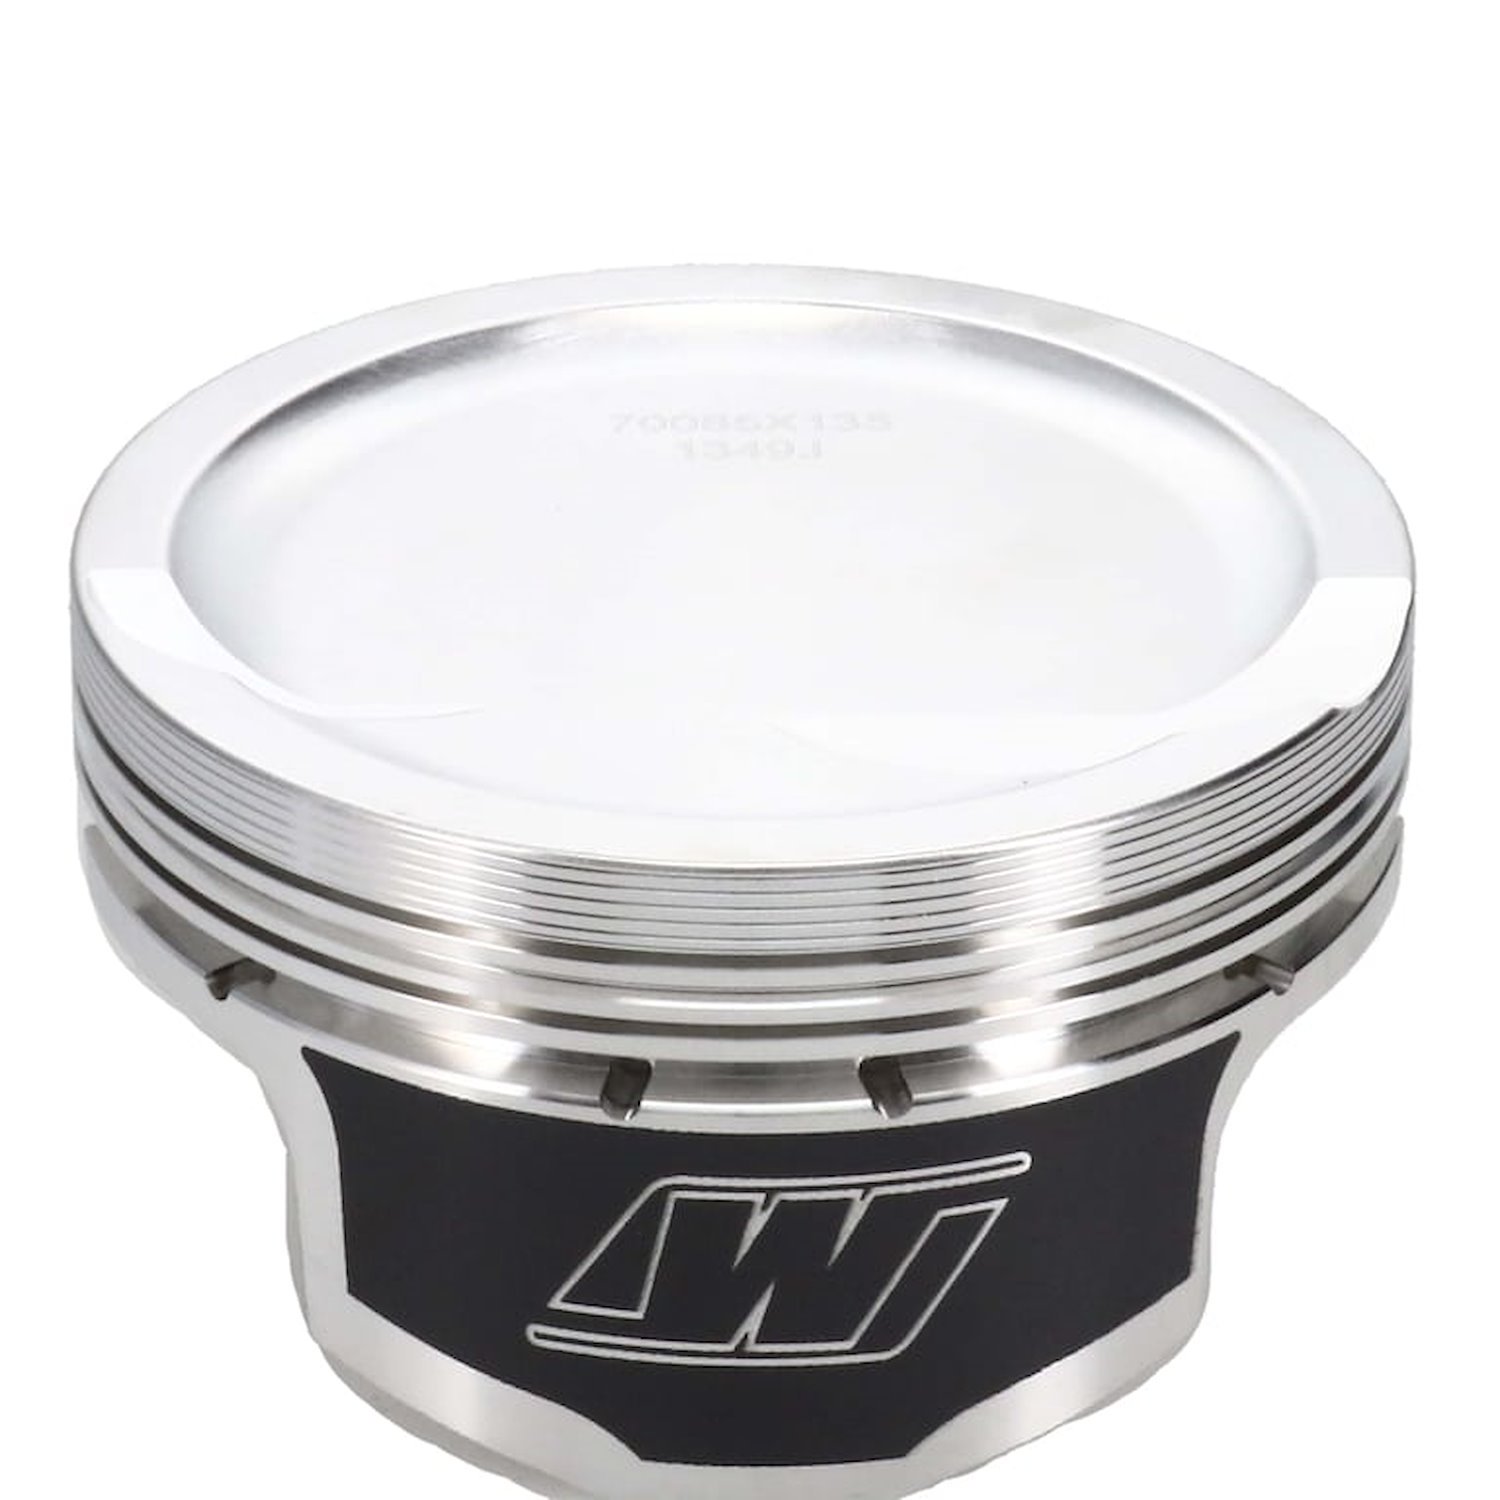 RED0085X130 RED-Series Piston Set, Chevy LS, 4.130 in. Bore, -20 cc Dish